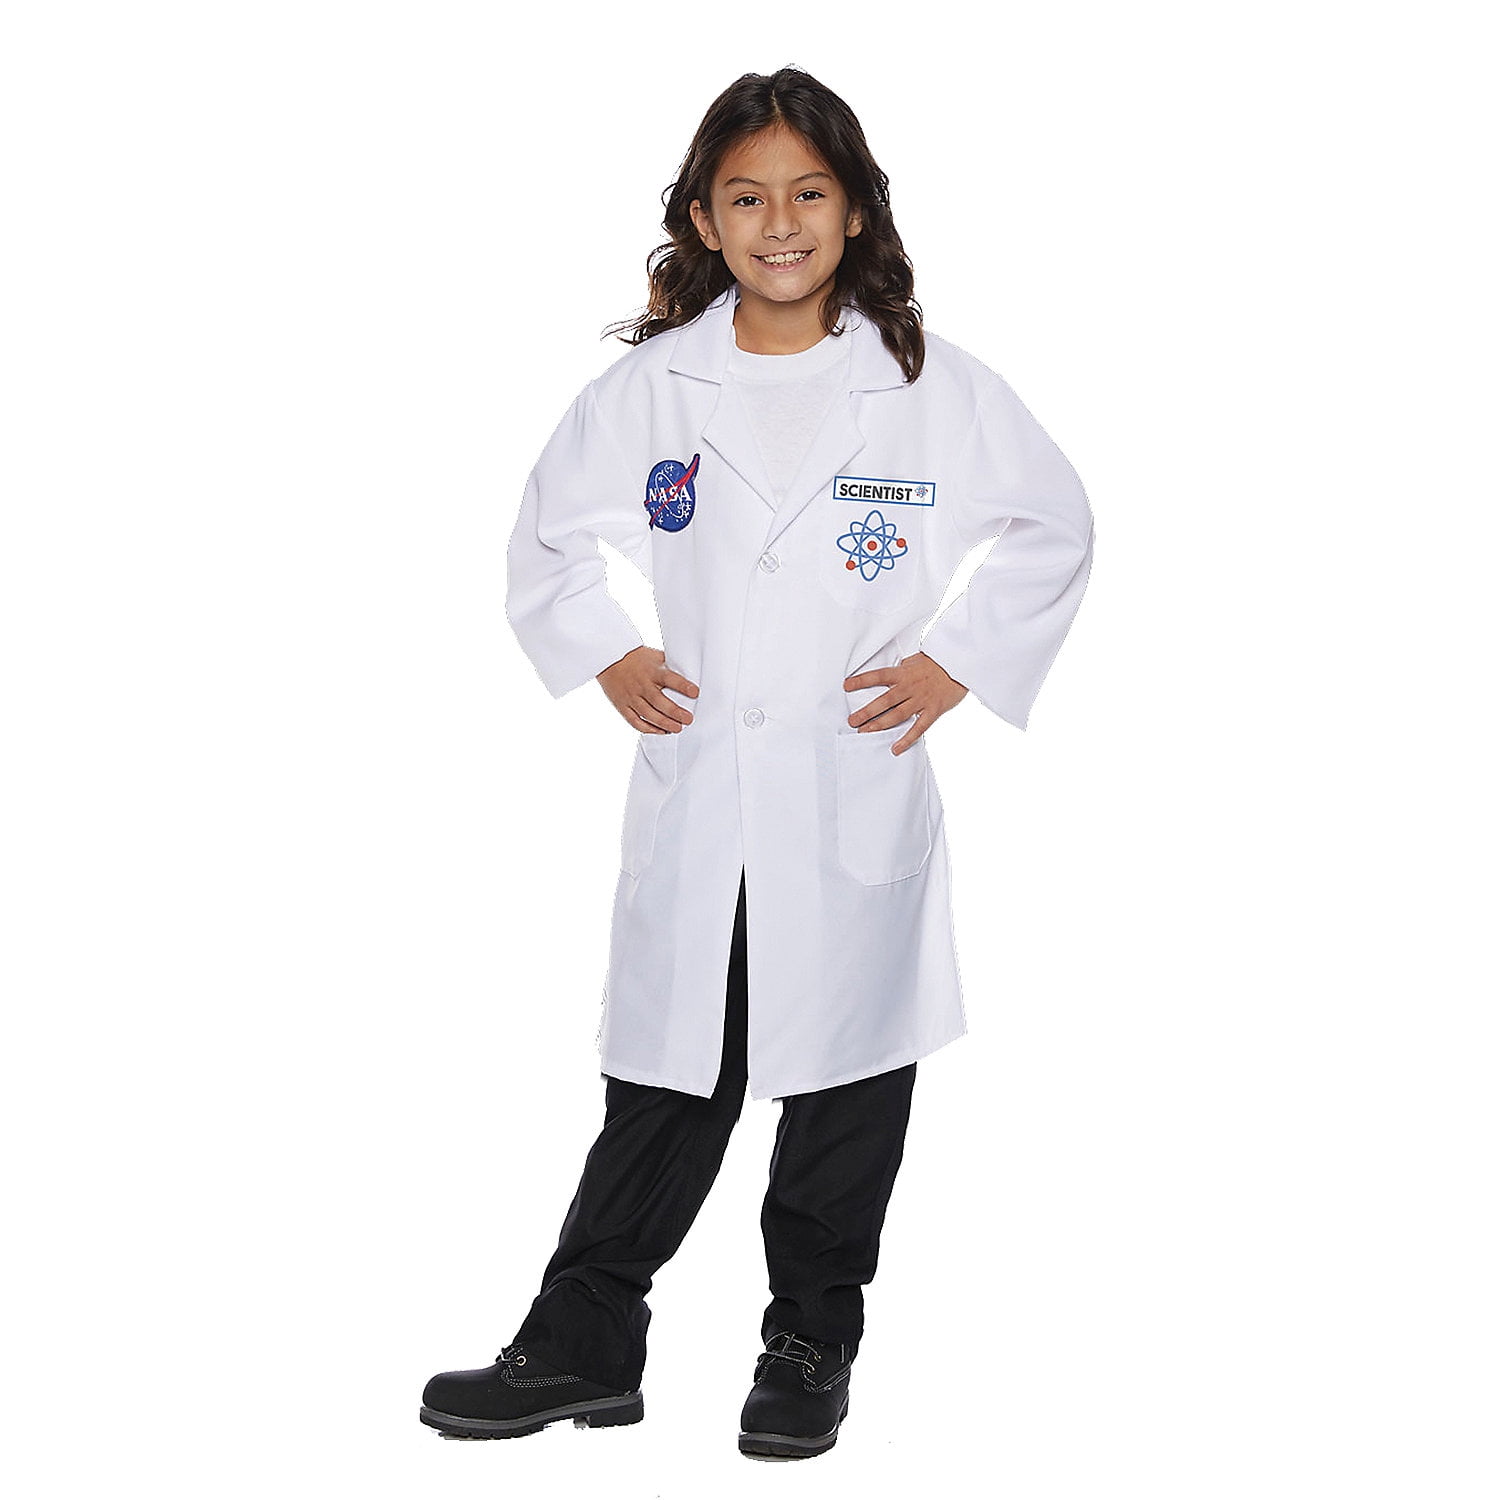 Klever Kits Science Lab Kit for Kids 60 Science Experiment Kit with Lab Coat Scientist Costume Dress Up and Role Play Toys Gift for Kids Christmas